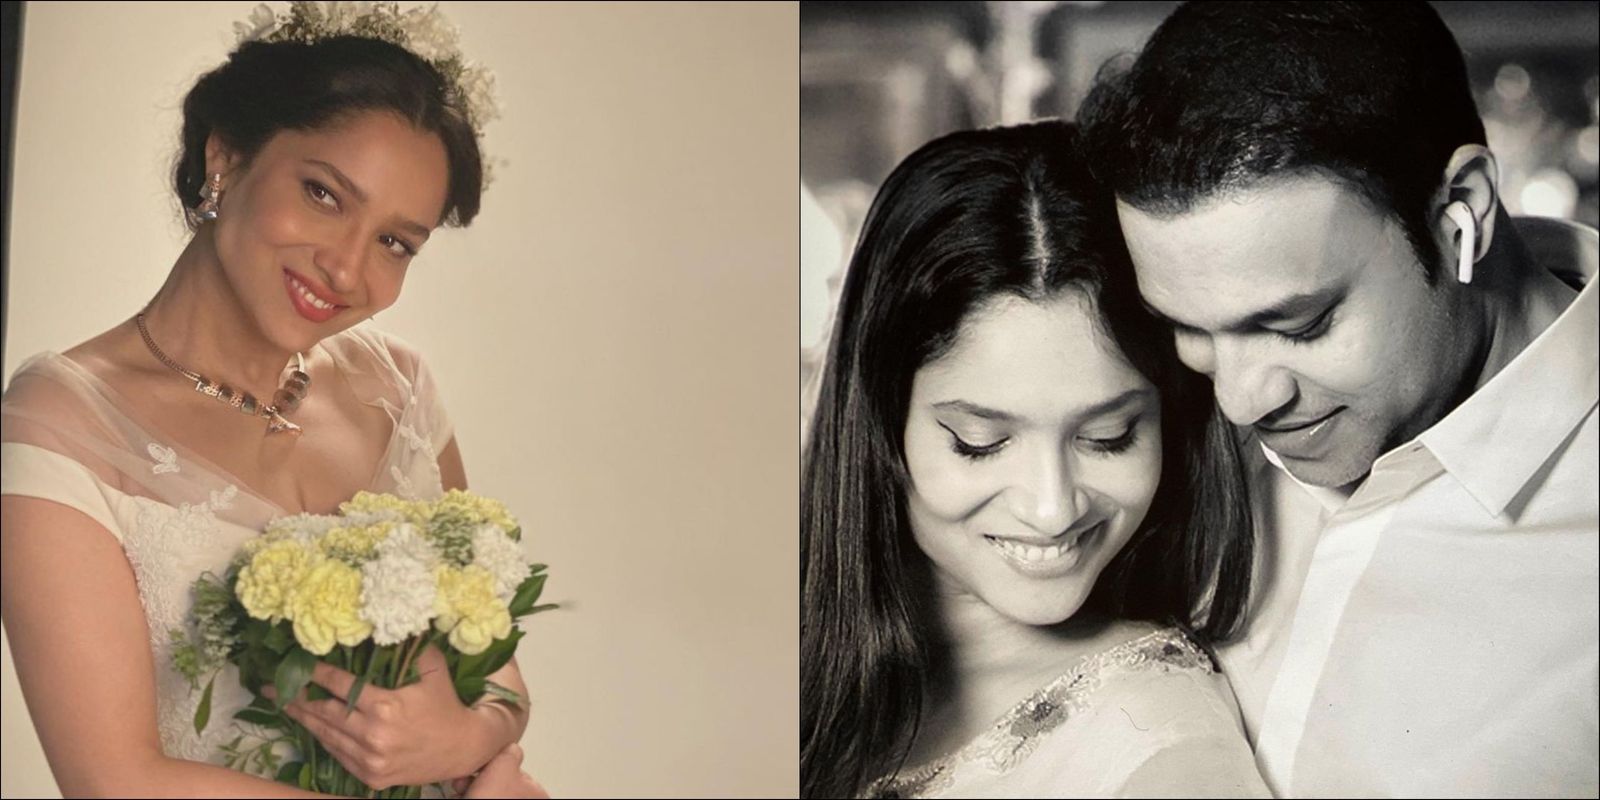 Ankita Lokhande Pens A Heartfelt Note For Beau Vicky Jain, Says "Words Fall Short But This Bond Is Amazing"; See Post